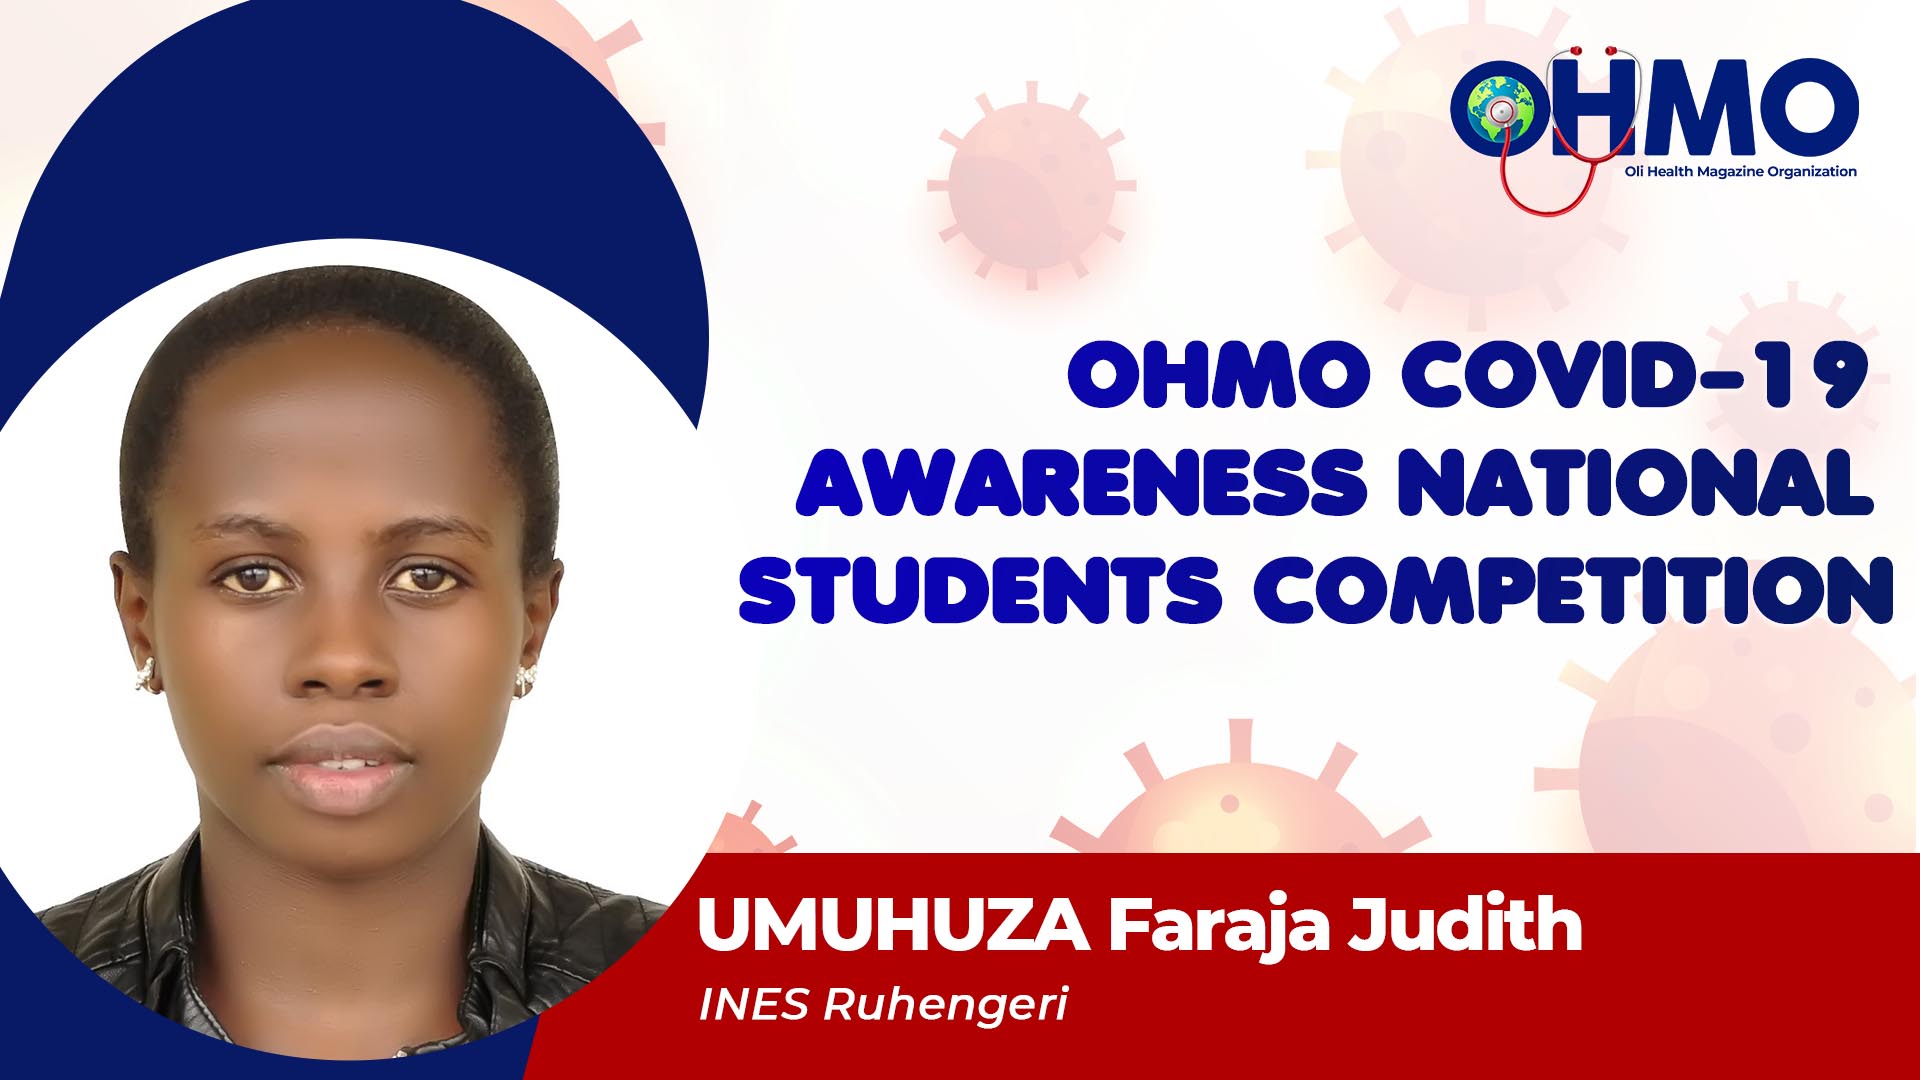 Selfcare, Mental Health And Coping During The Pandemic - UMUHUZA Faraja Judith from INES Ruhengeri (ENTRY 25)